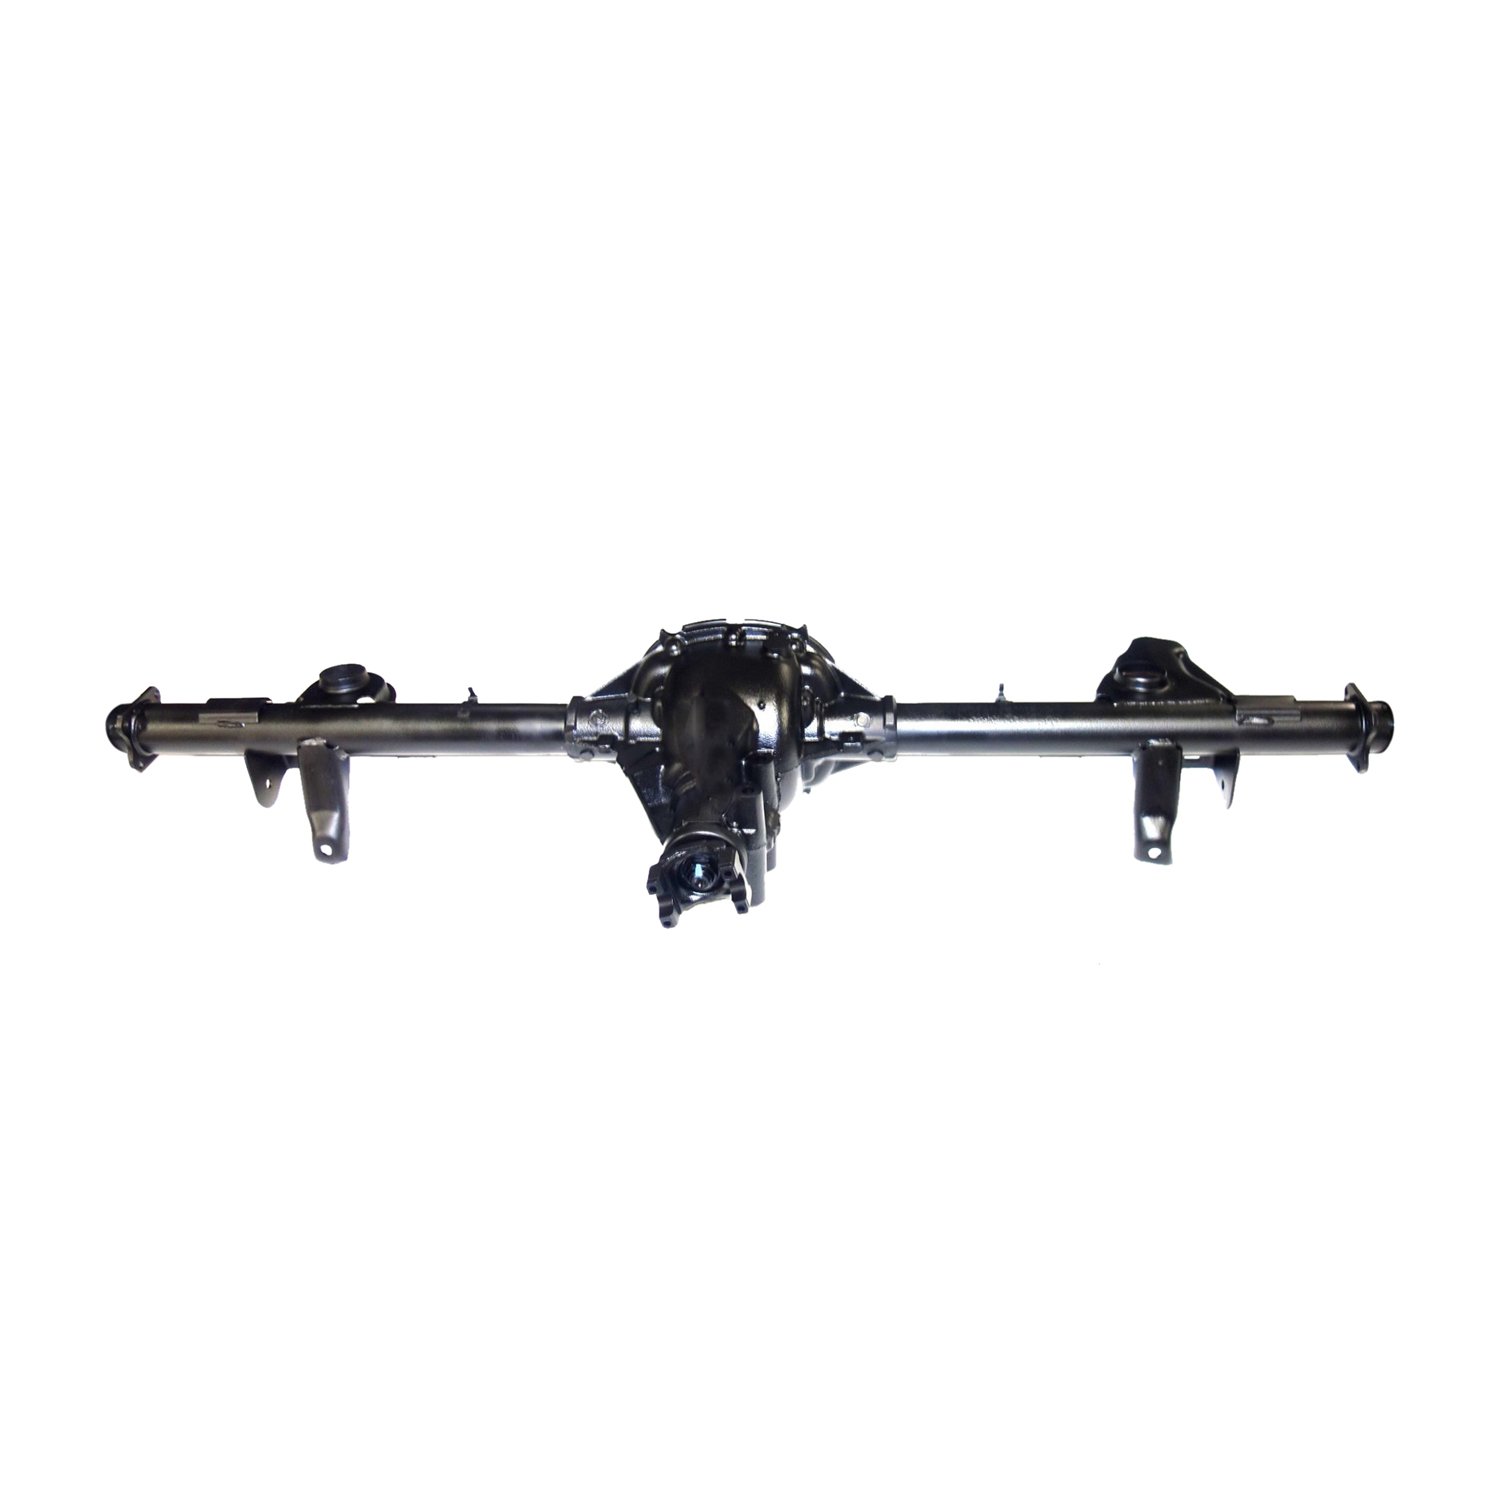 Remanufactured Axle Assy for GM 7.5" 95-97 S10 Blazer & S15 Jimmy, 3.42 , 4x4, Posi LSD